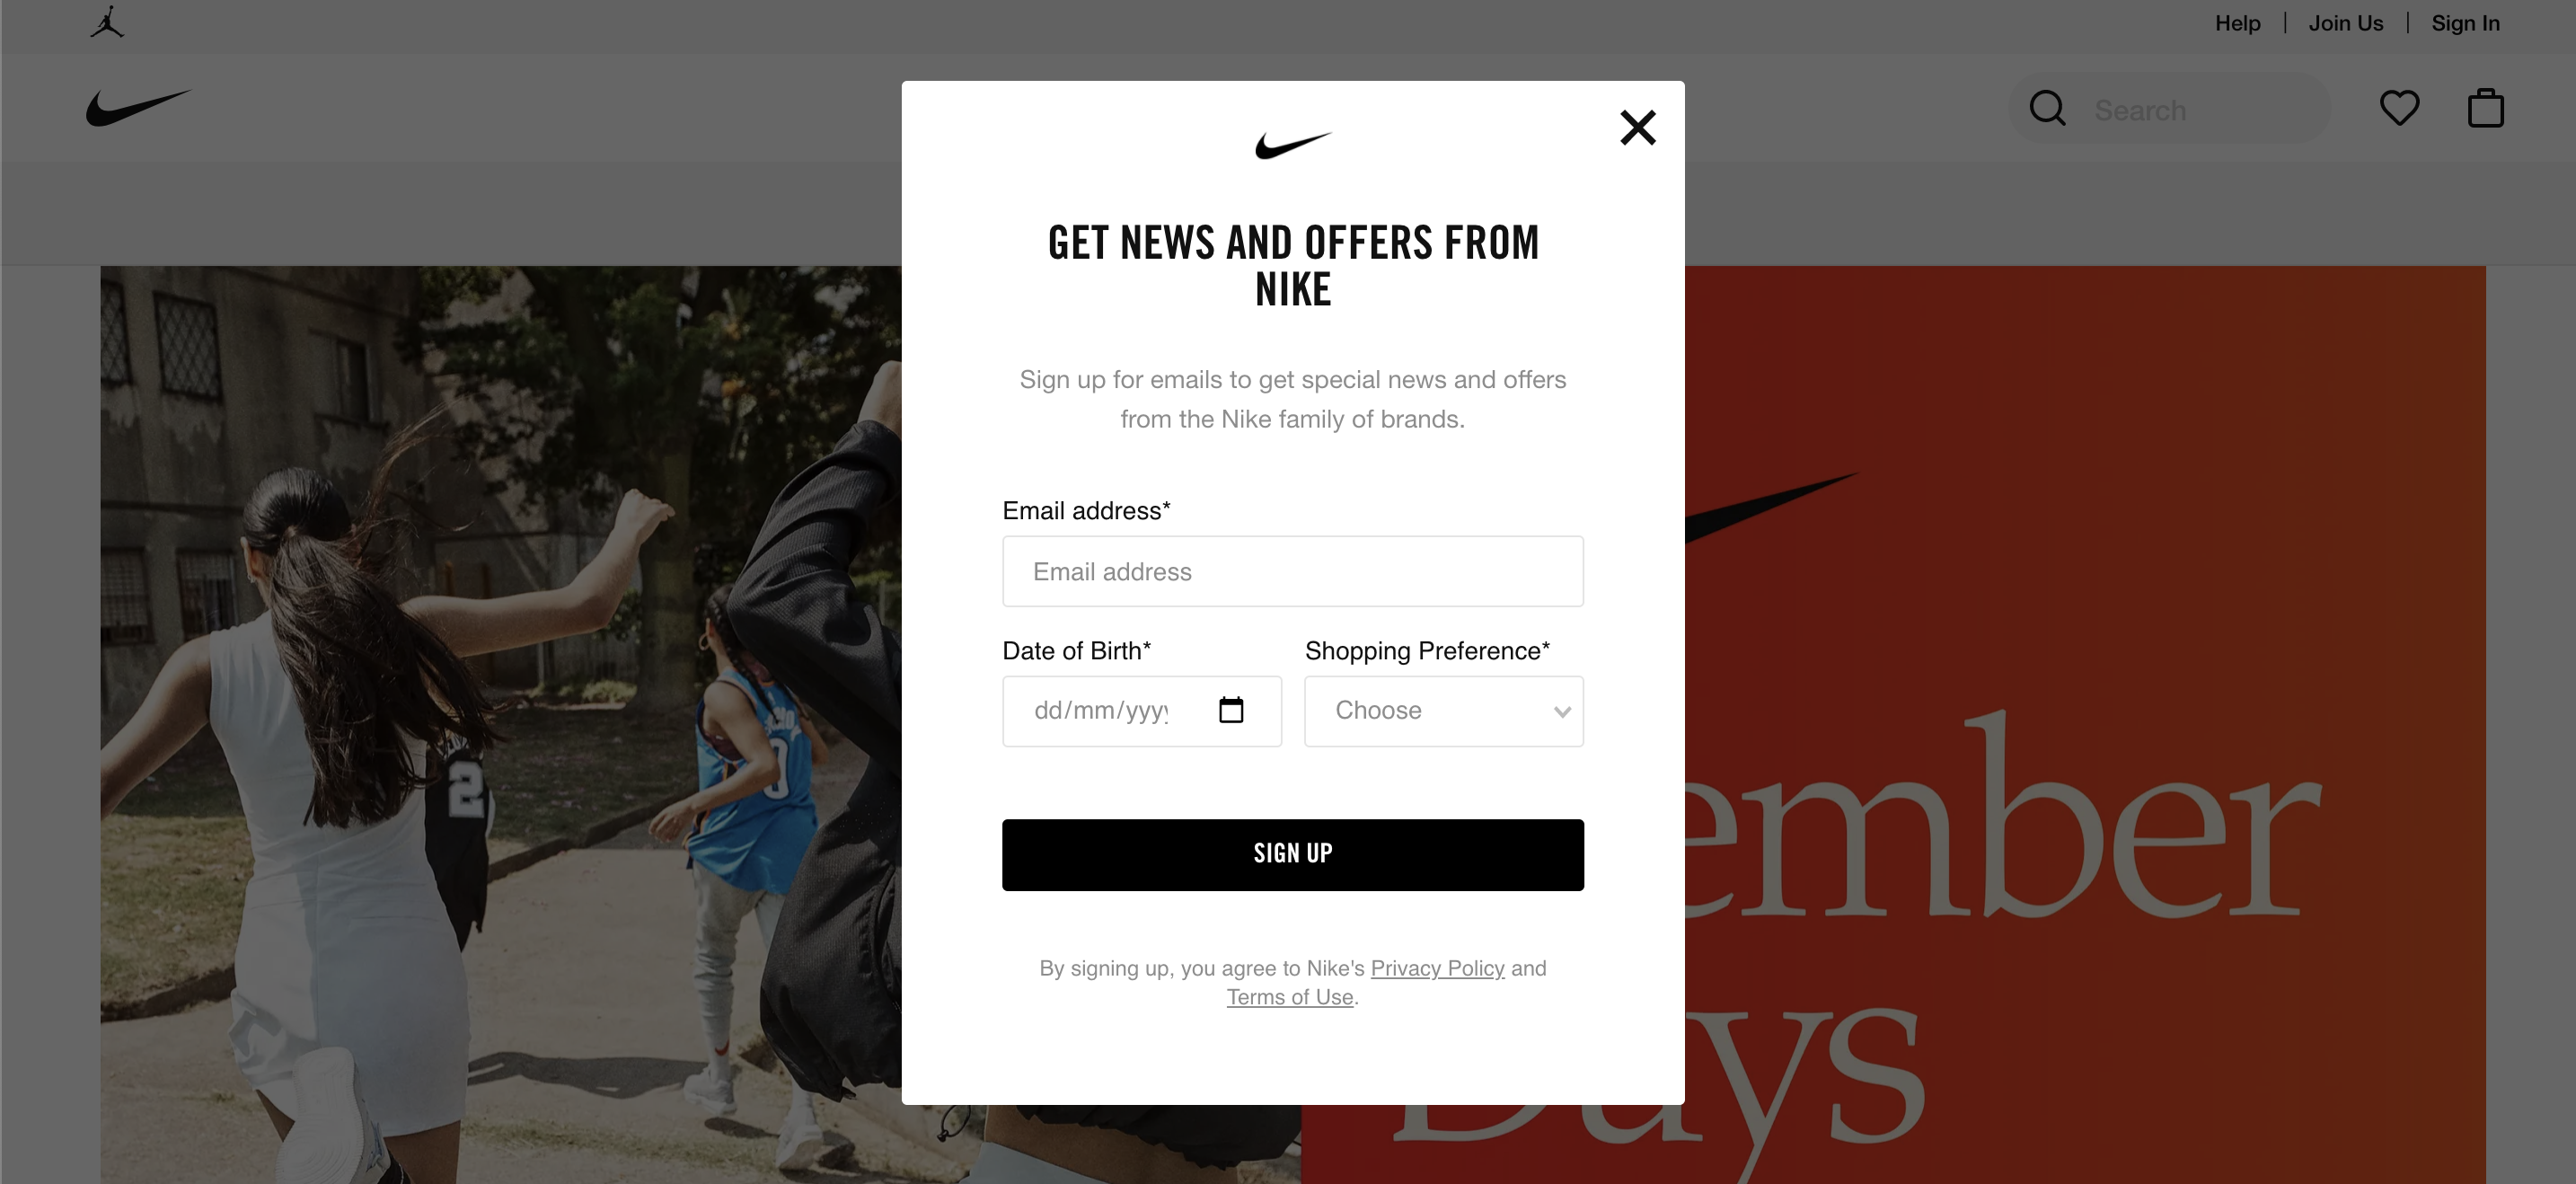 Nike pop up opt in email sign up form